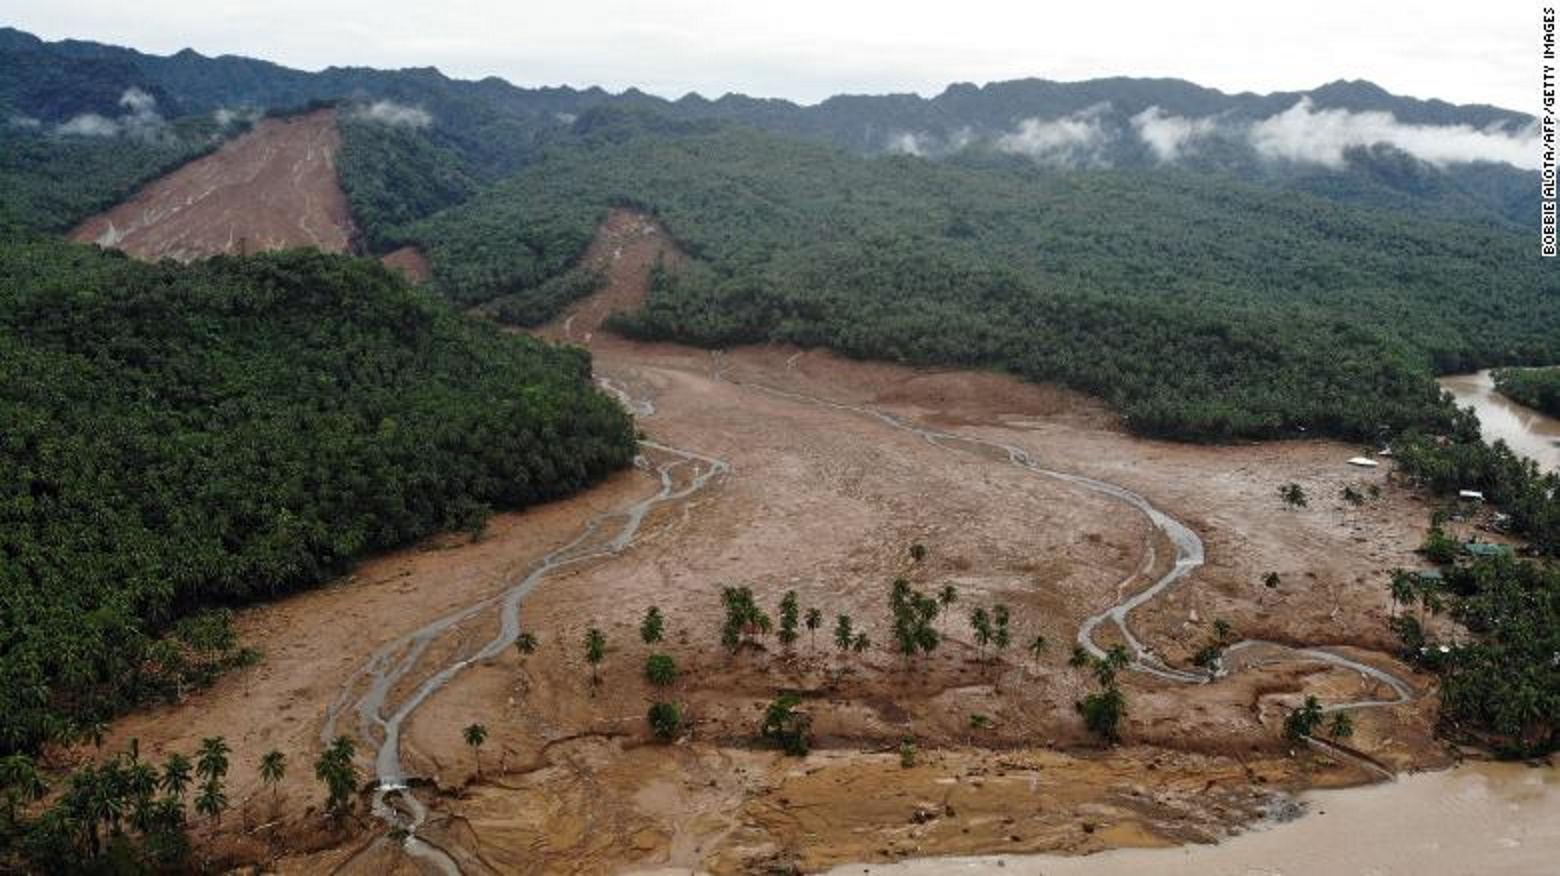 Aerial view of a landslide caused by tropical storm Megi, which hit the village of Kantagnos in Baybay town, Leyte province, Philippines, on 13 April 2022. Photo: Bobbie Alota / AFP / Getty Images